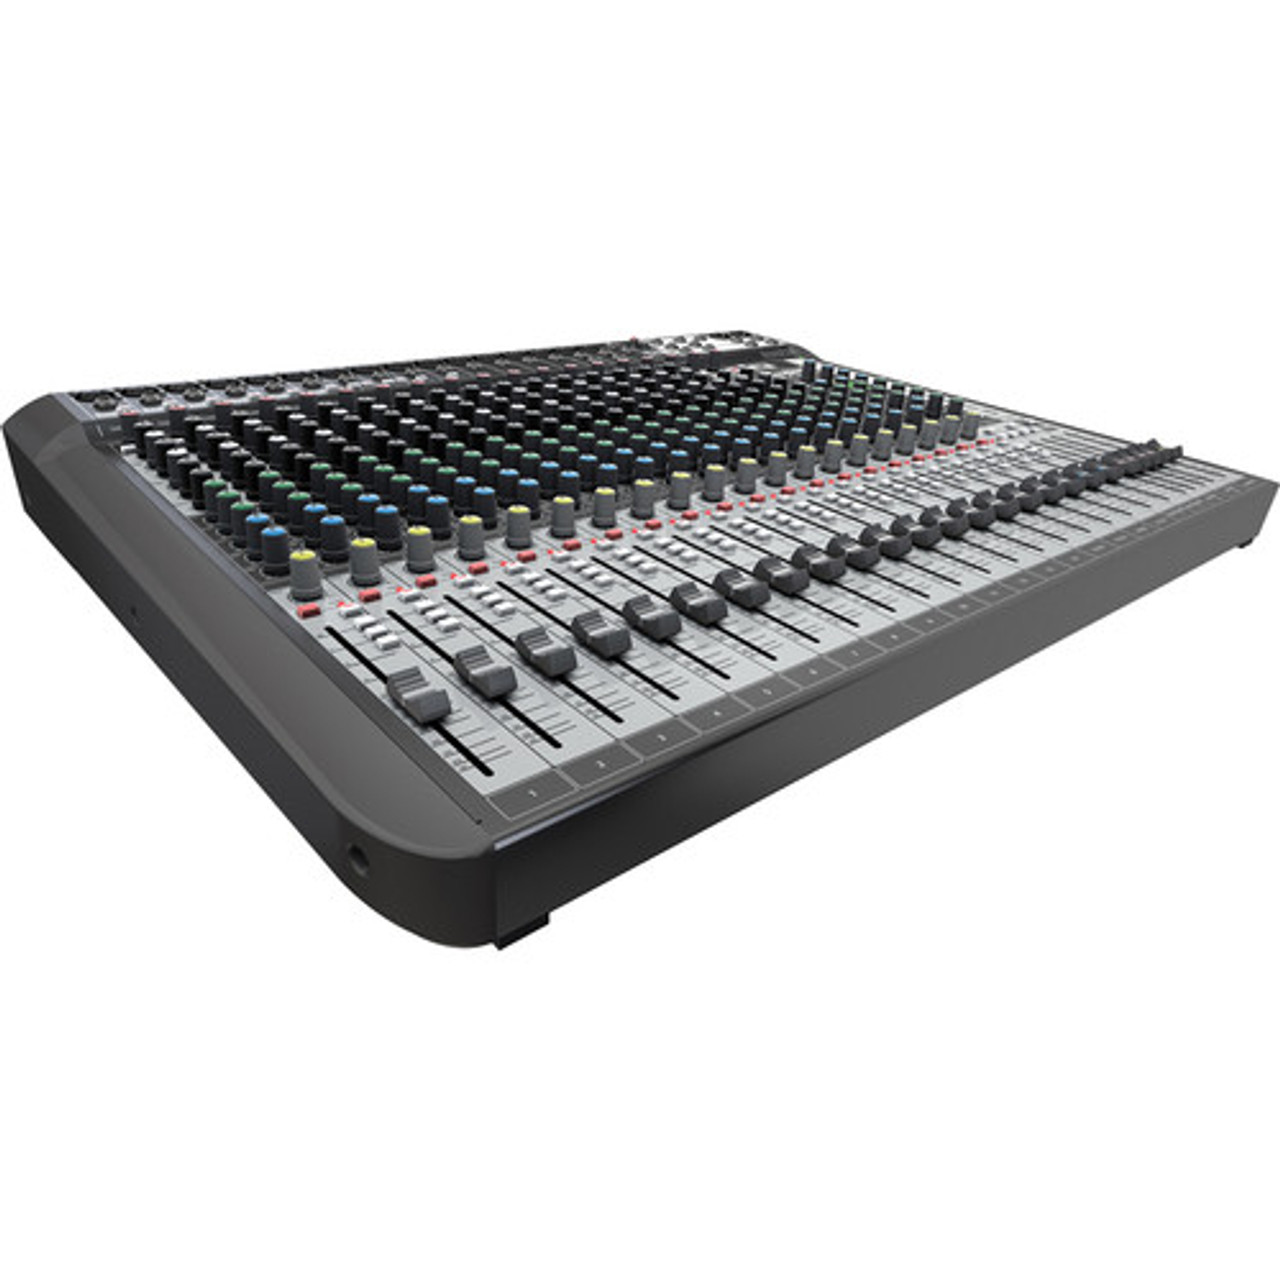 Soundcraft Signature 22 MTK 22-Input Multi-Track Mixer with Effects (5049563)